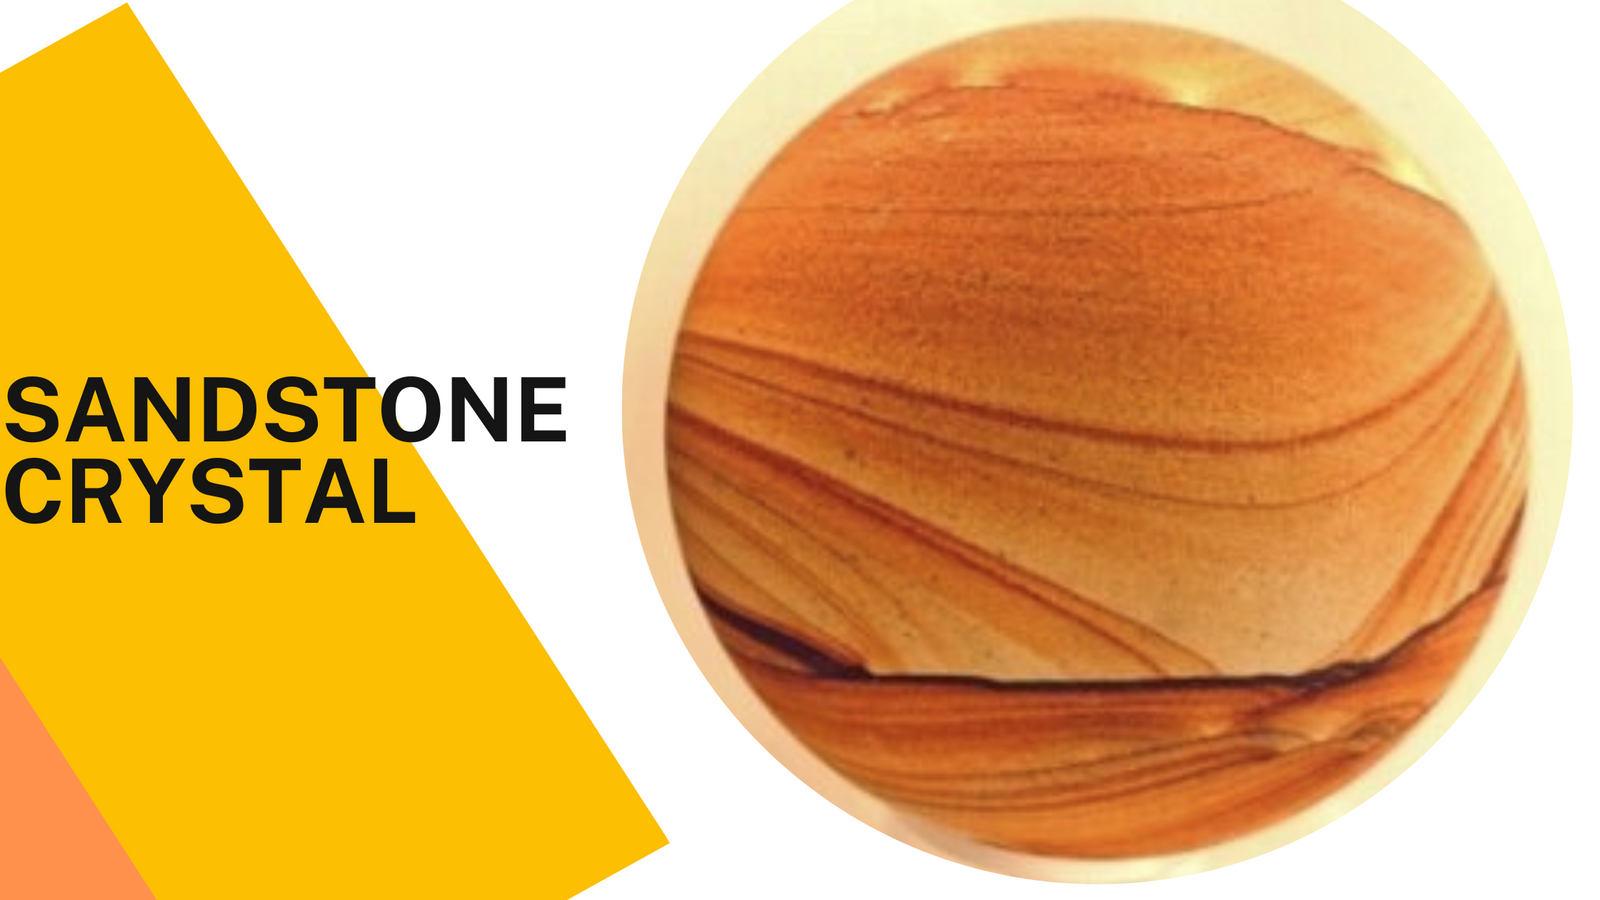 Sandstone Crystal Meaning - Symbolic and Meaningful Rocks!